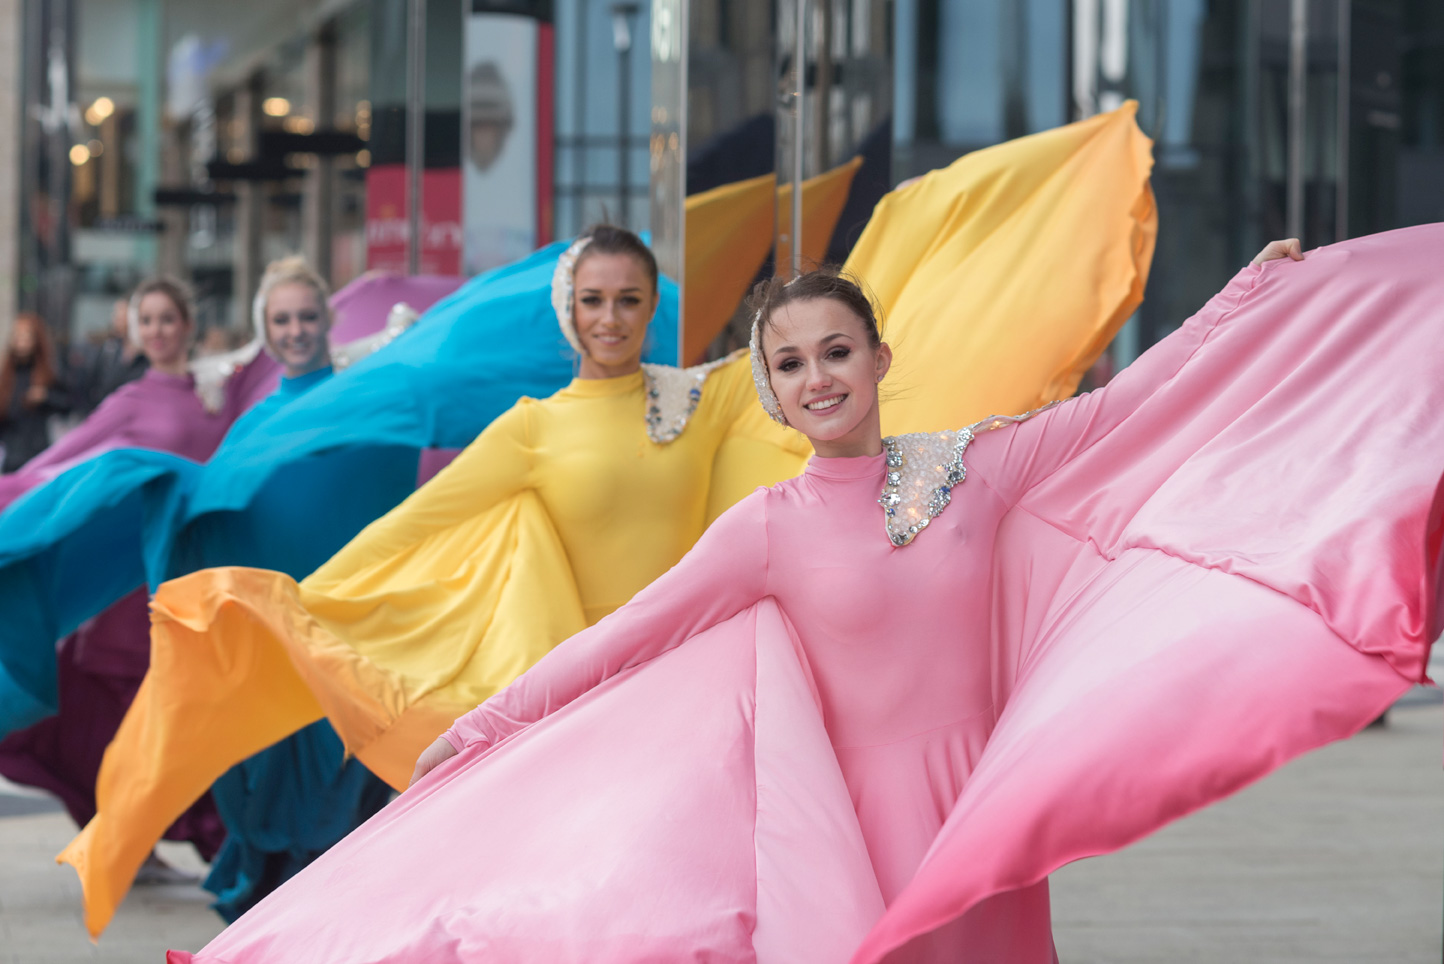 Promotional dancers at shopping retail park in Leeds